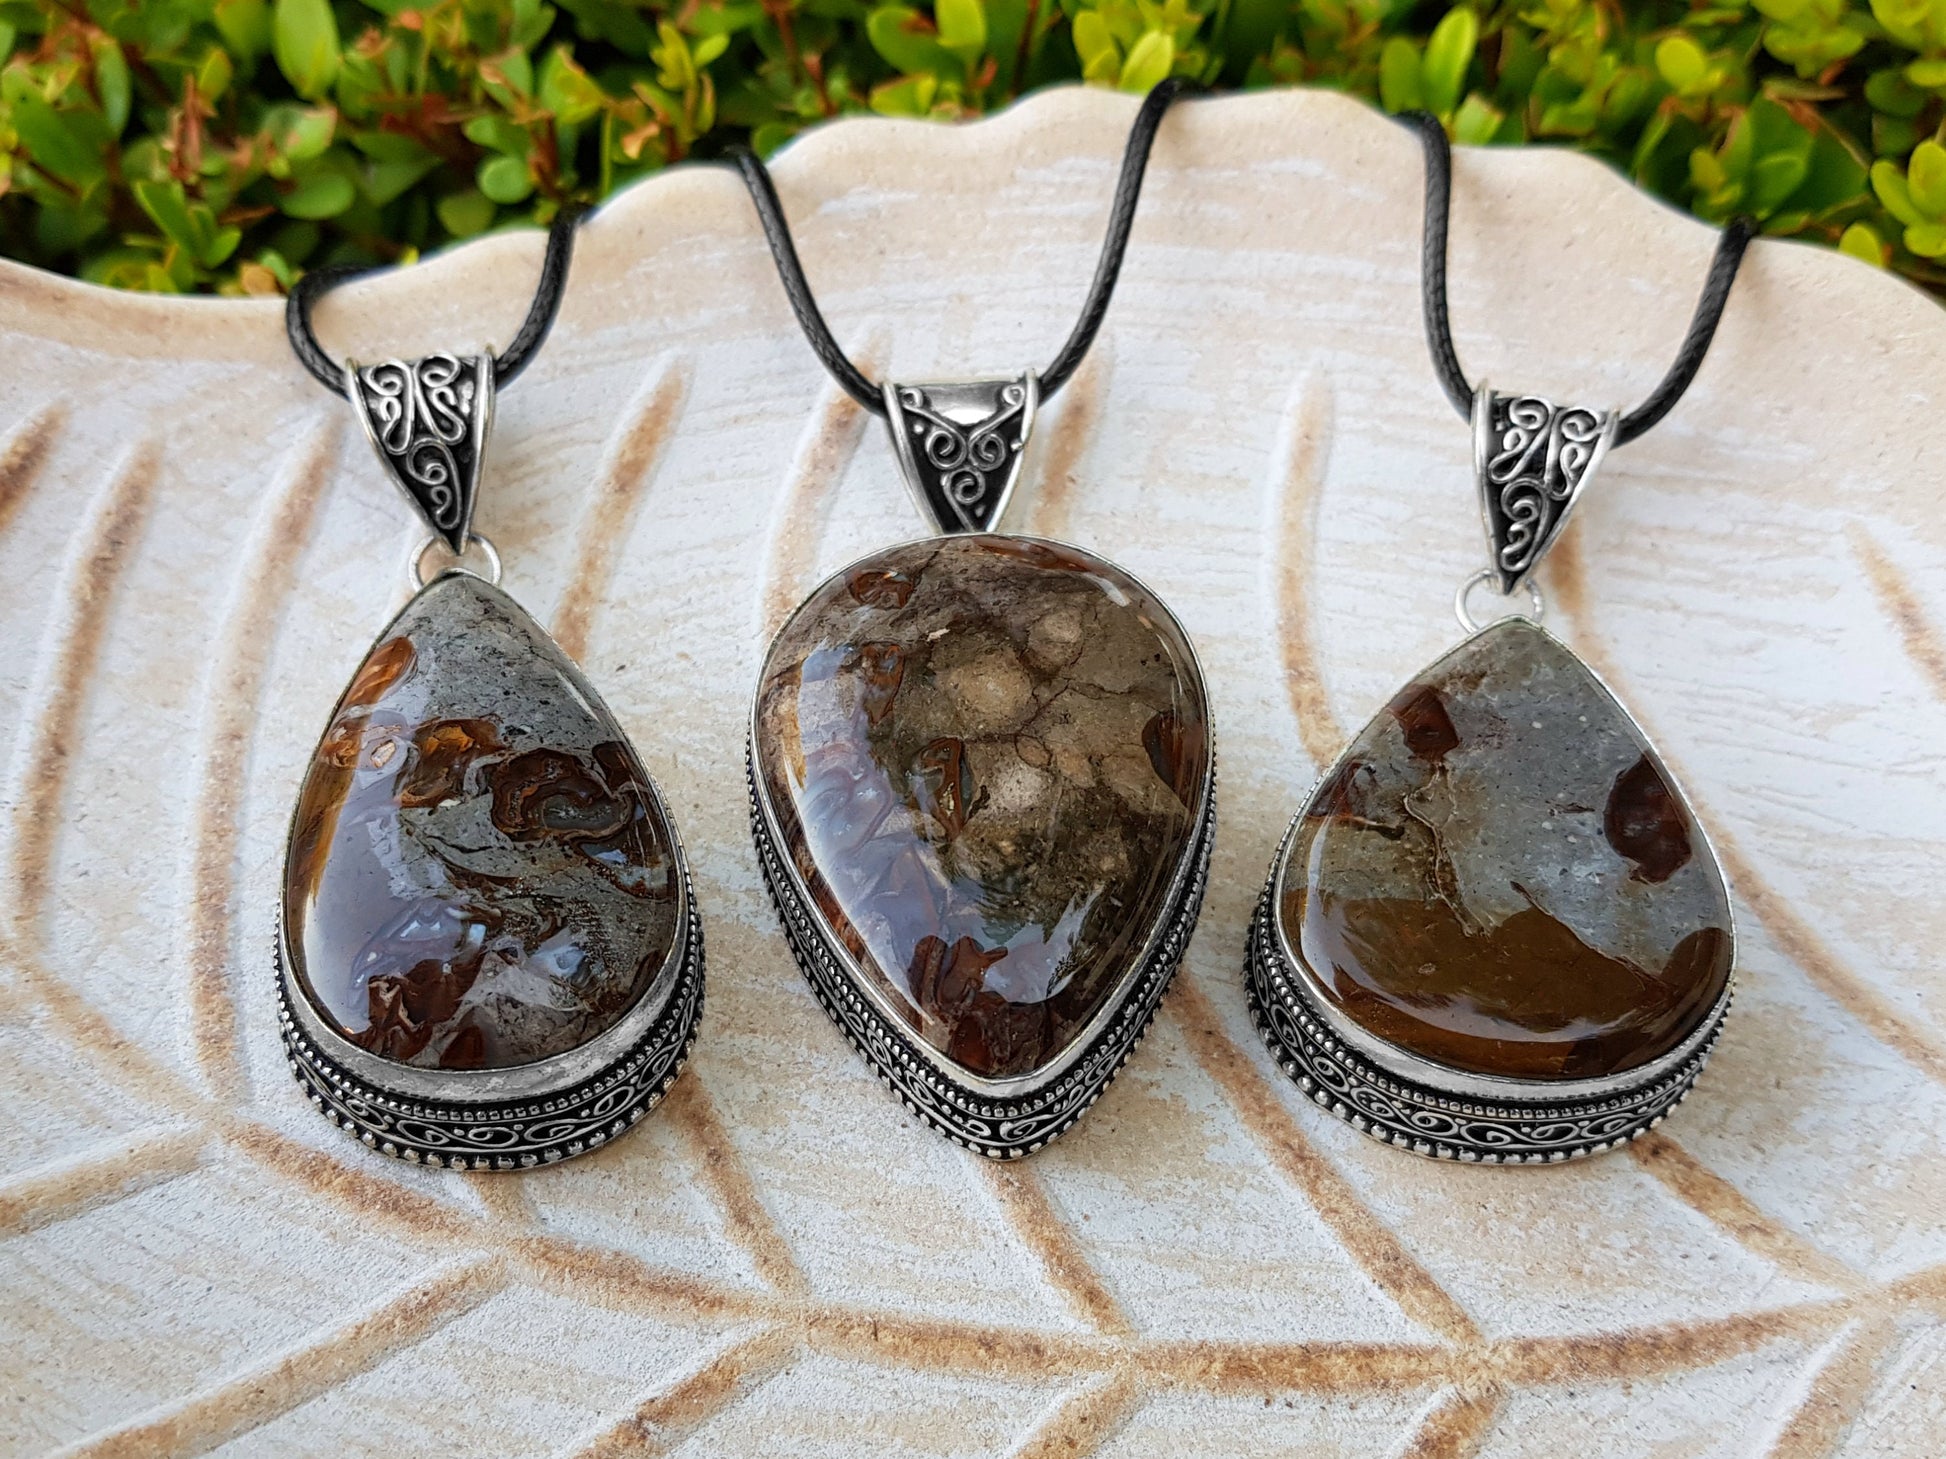 Coffee Bean Jasper Pendant Sterling Silver Statement Necklace Boho Necklace One Of A Kind Gift